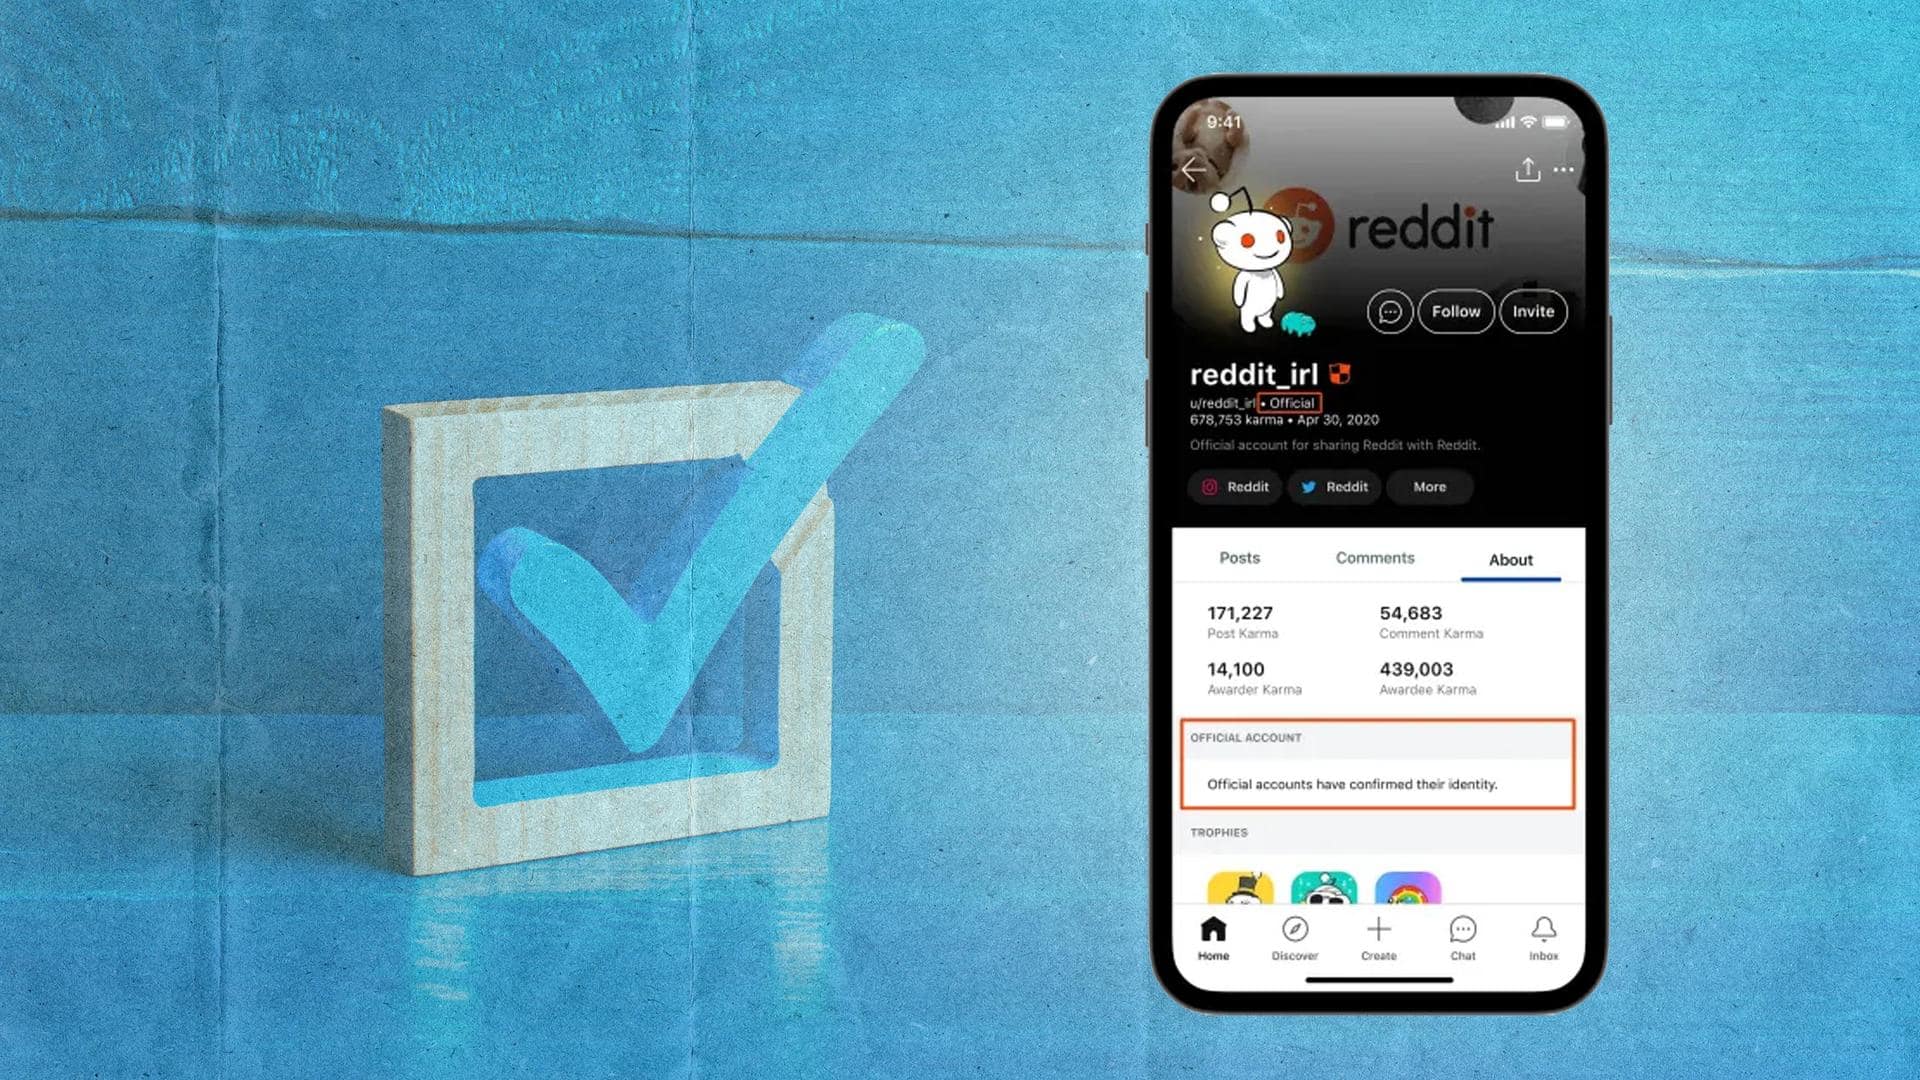 Reddit is testing new 'Official' label: How it works